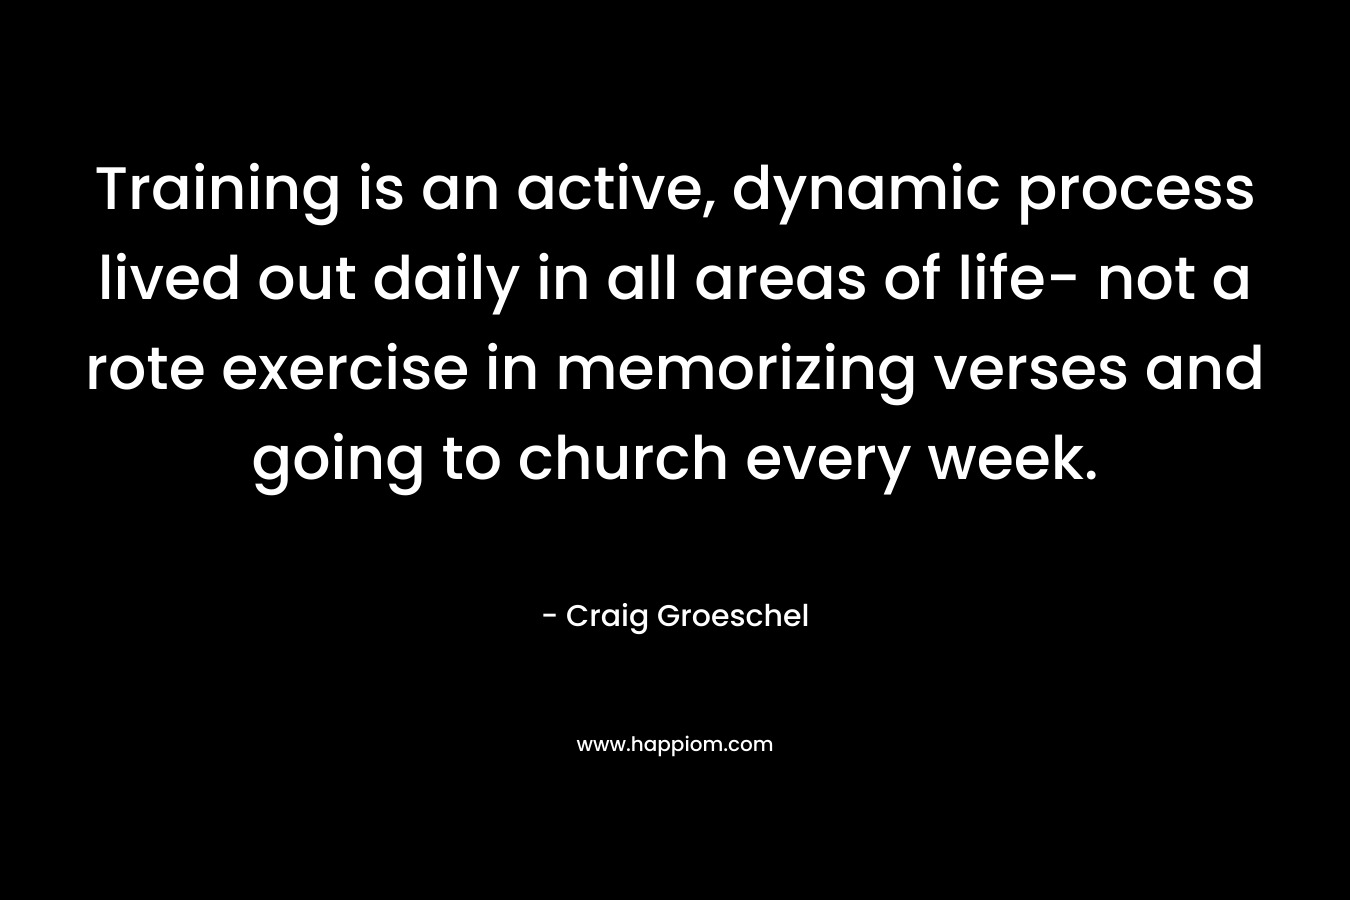 Training is an active, dynamic process lived out daily in all areas of life- not a rote exercise in memorizing verses and going to church every week.